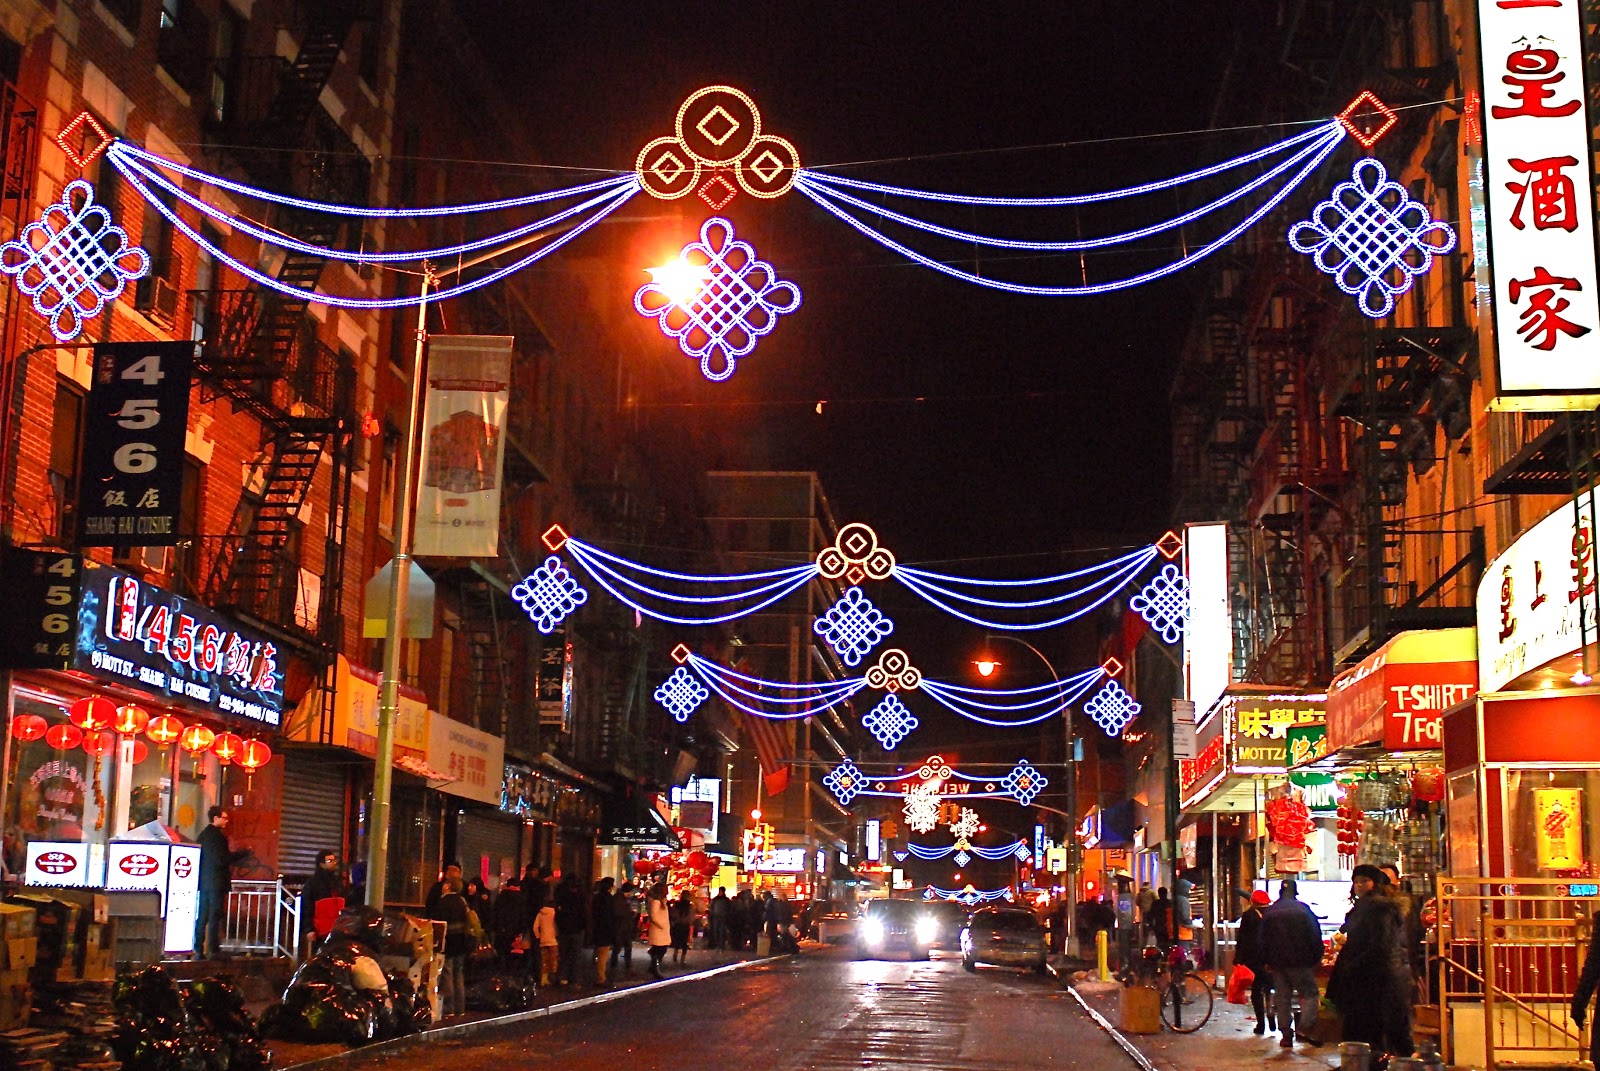 Colorful photos of Chinatown in New York City | BOOMSbeat1600 x 1071